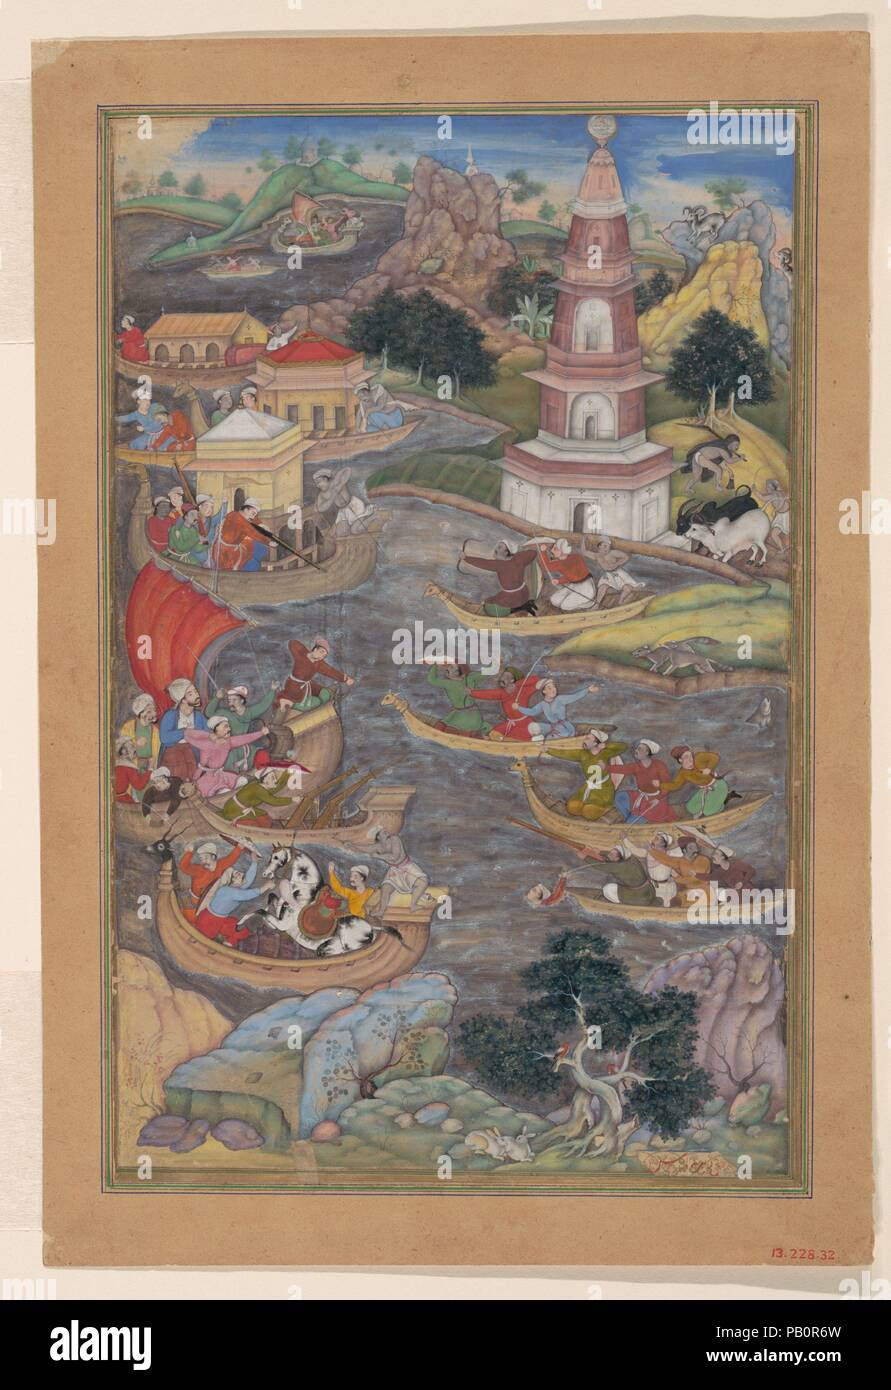 'Alexander Fights a Sea Battle', Folio from a Khamsa (Quintet) of Amir Khusrau Dihlavi. Artist: Dharmadas. Dimensions: H. 9 3/4 in. (24.8 cm)  W. 6 1/4 in. (15.9 cm). Poet: Amir Khusrau Dihlavi (1253-1325). Date: 1597-98.  In the episode illustrated, Alexander the Great has ordered the construction of a tall tower surmounted by a revolving mirror in order to battle the pirates menacing the Mediterranean Sea. The protagonists appear as contemporary Indians wearing turbans and tunics, rather than ancient Greeks, and one of the fighters uses a gun, an invention from nearly two millennia after Ale Stock Photo